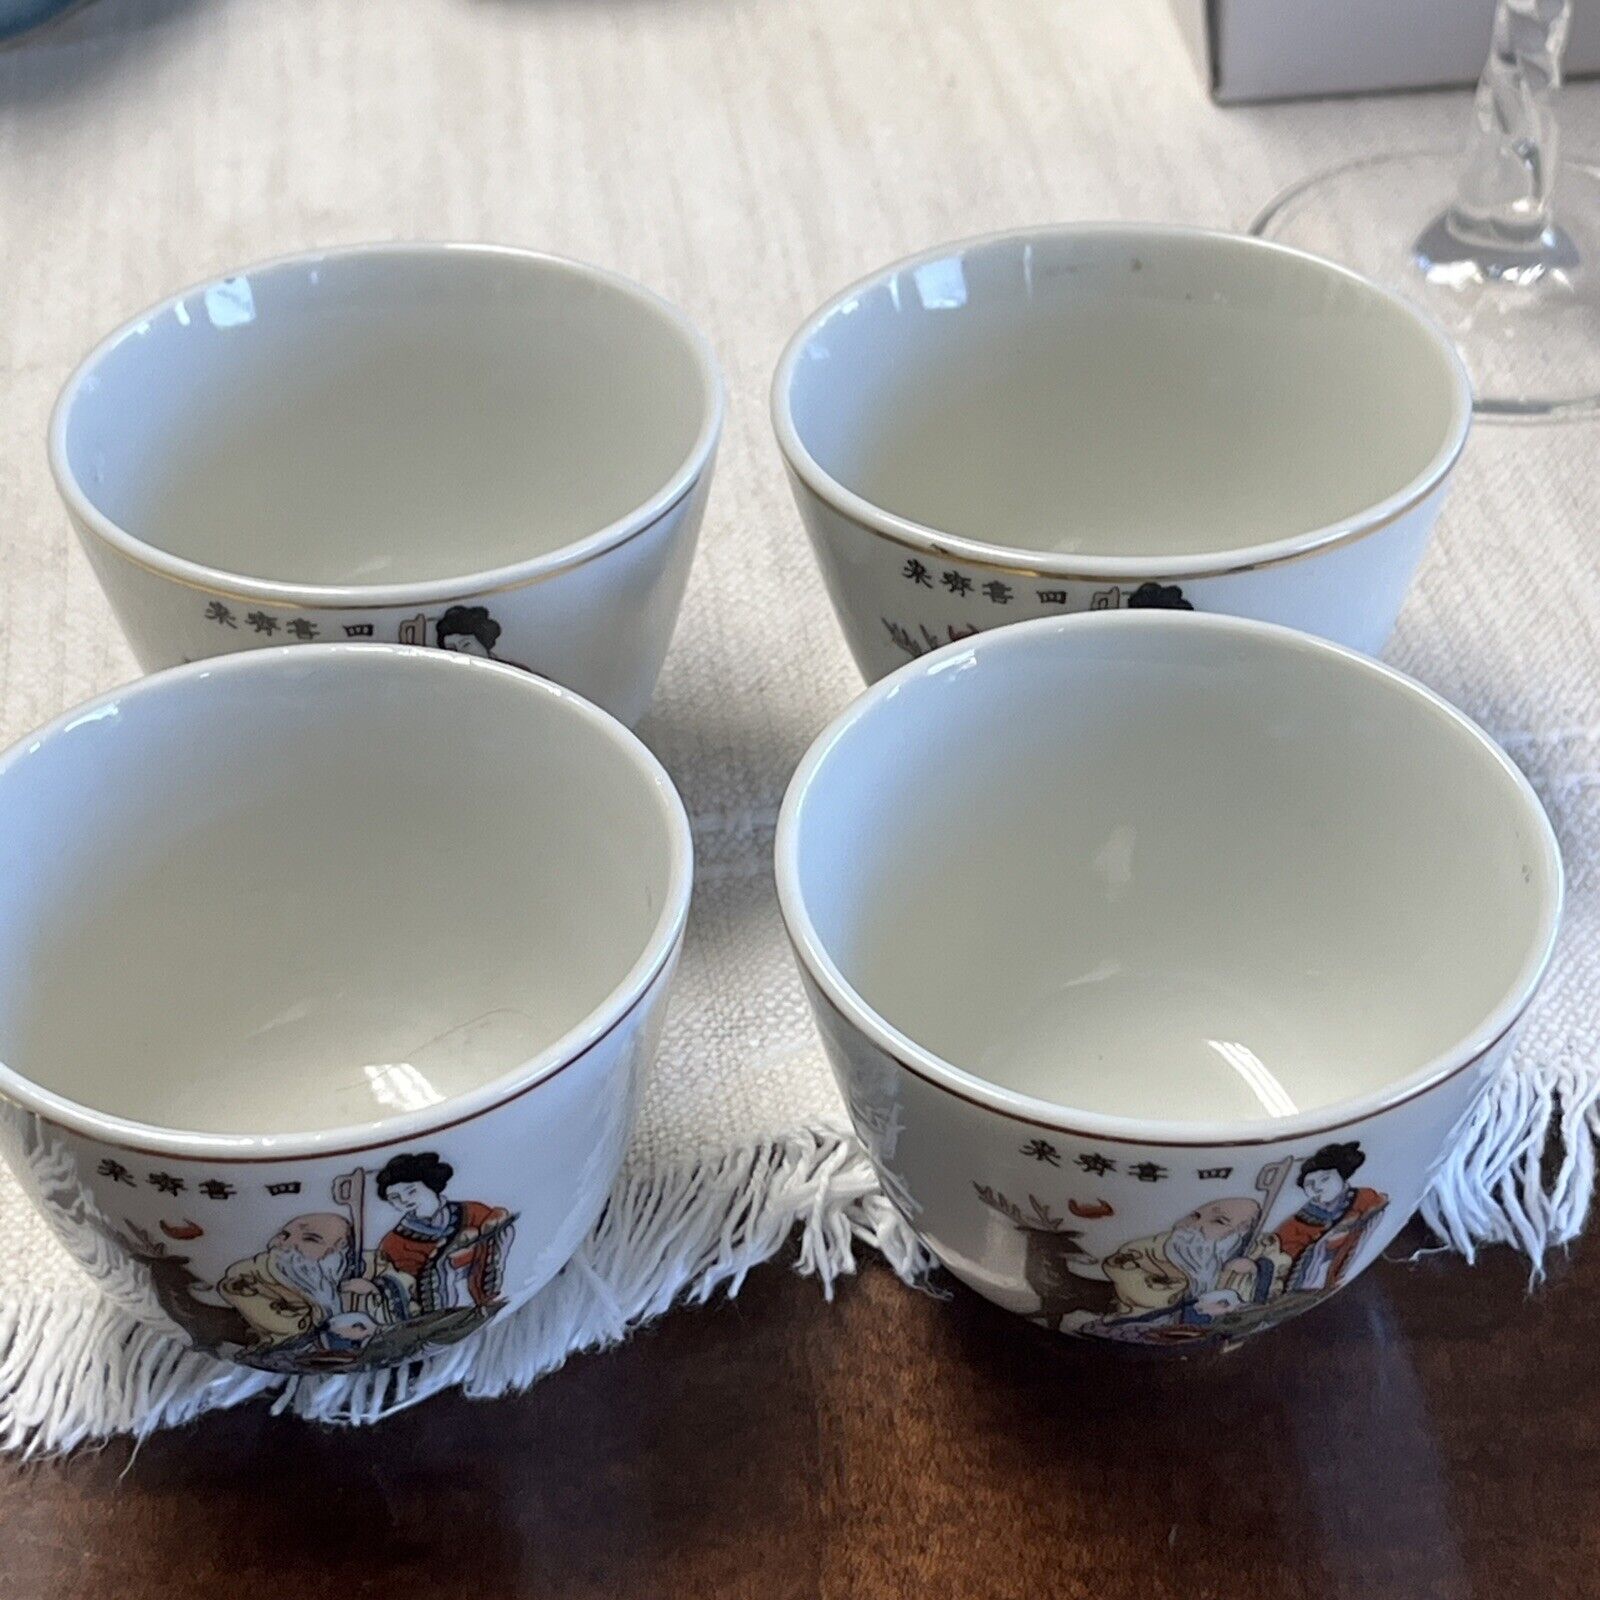 Vintage Golden China Picture Story Cup 4 Cups Geisha Girl Chinese Asian Accents